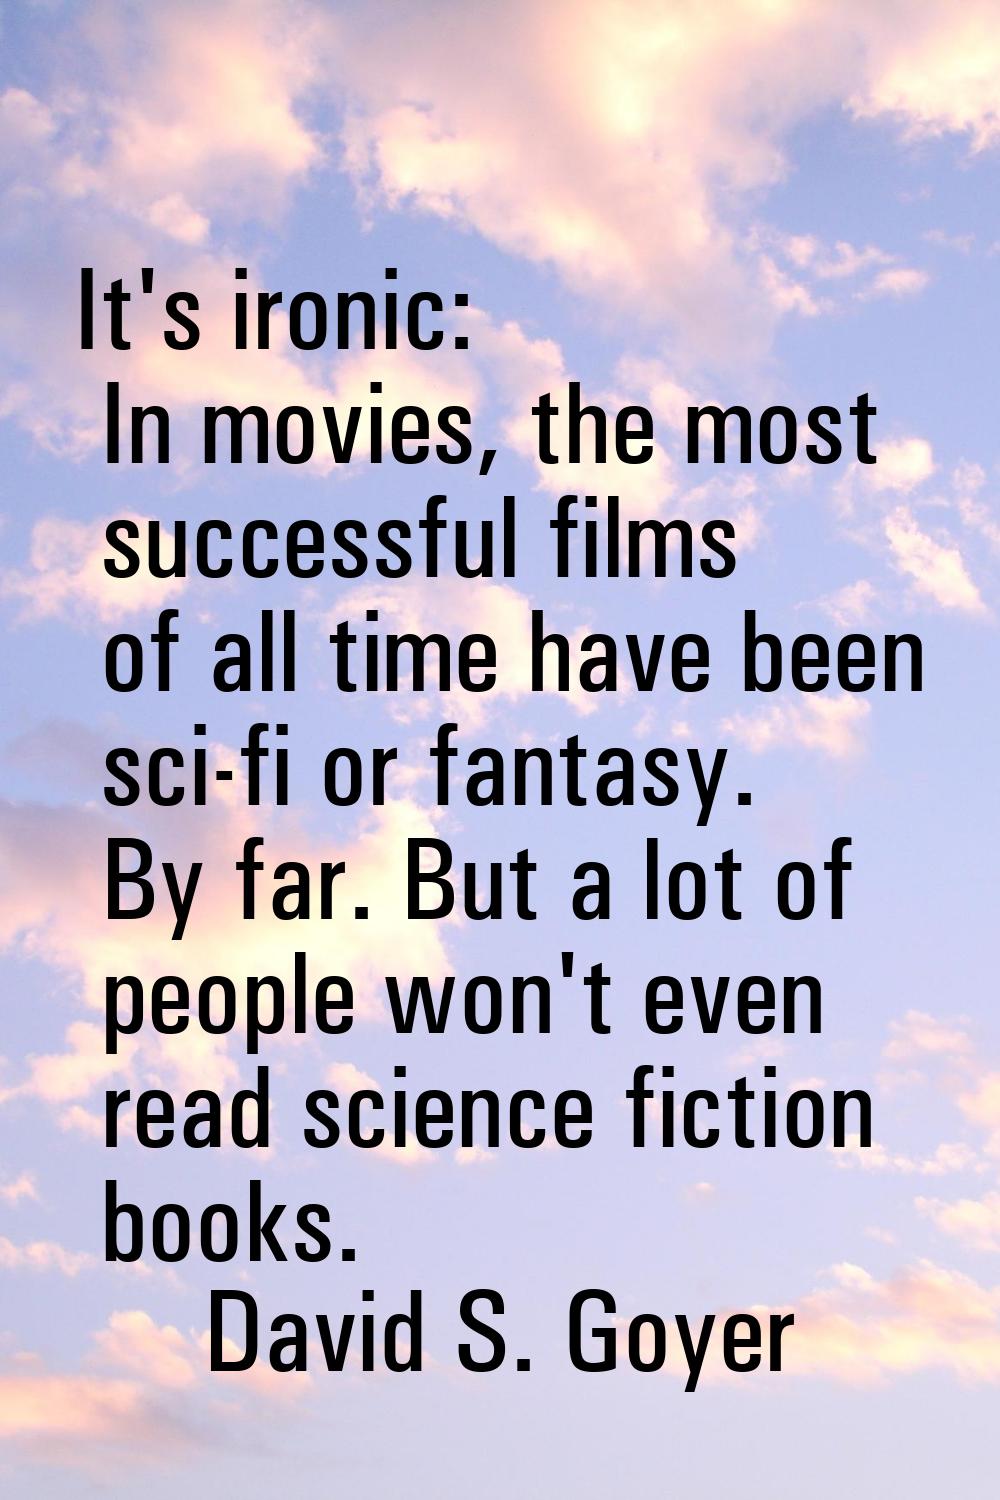 It's ironic: In movies, the most successful films of all time have been sci-fi or fantasy. By far. 